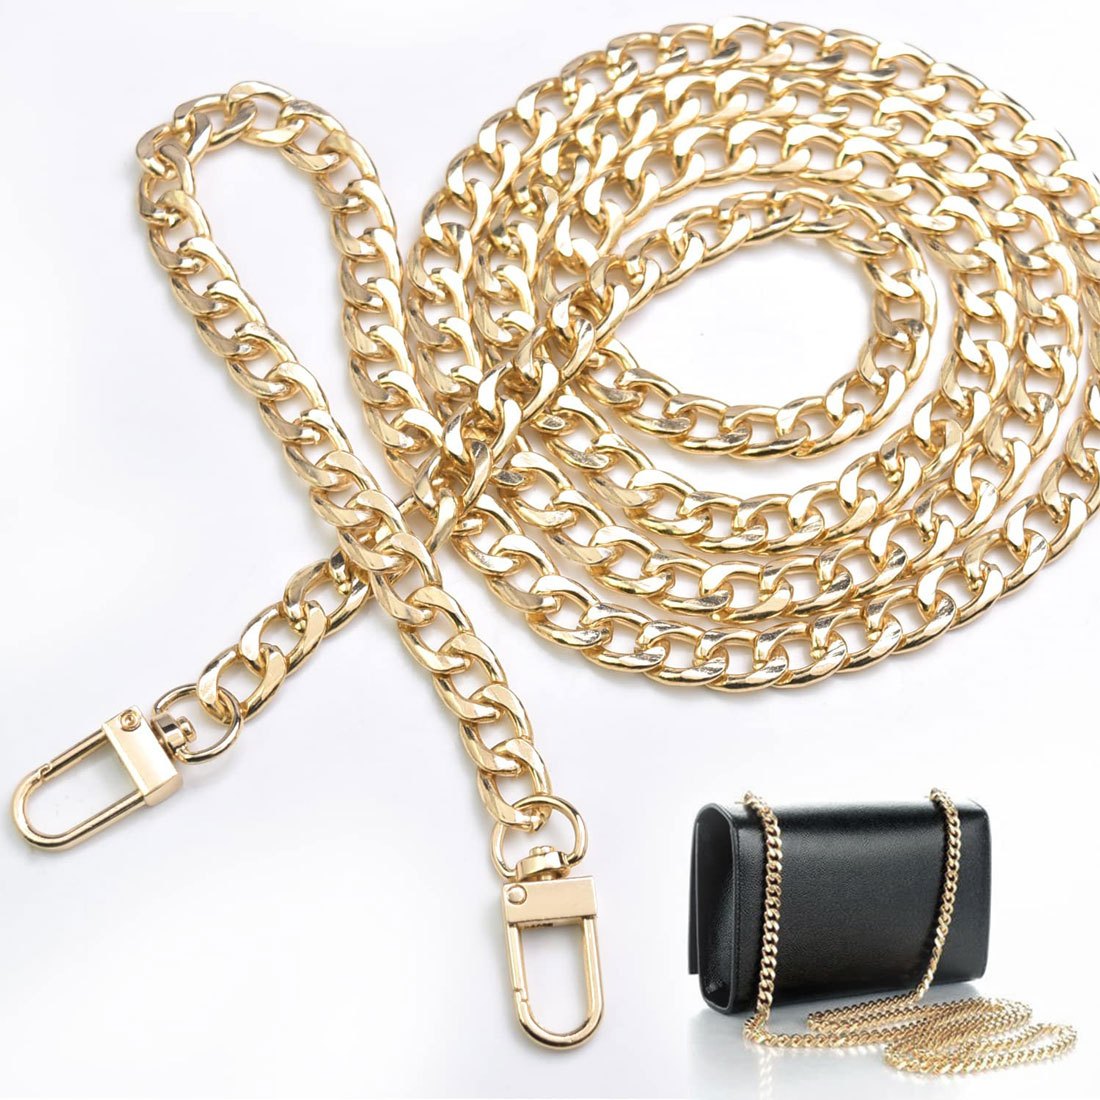 6pcs Gold Purse Chain Strap Purse Strap Extender DIY Flat Chain Purse Strap Replacement Strap with Metal Buckles, Men's, Size: One Size